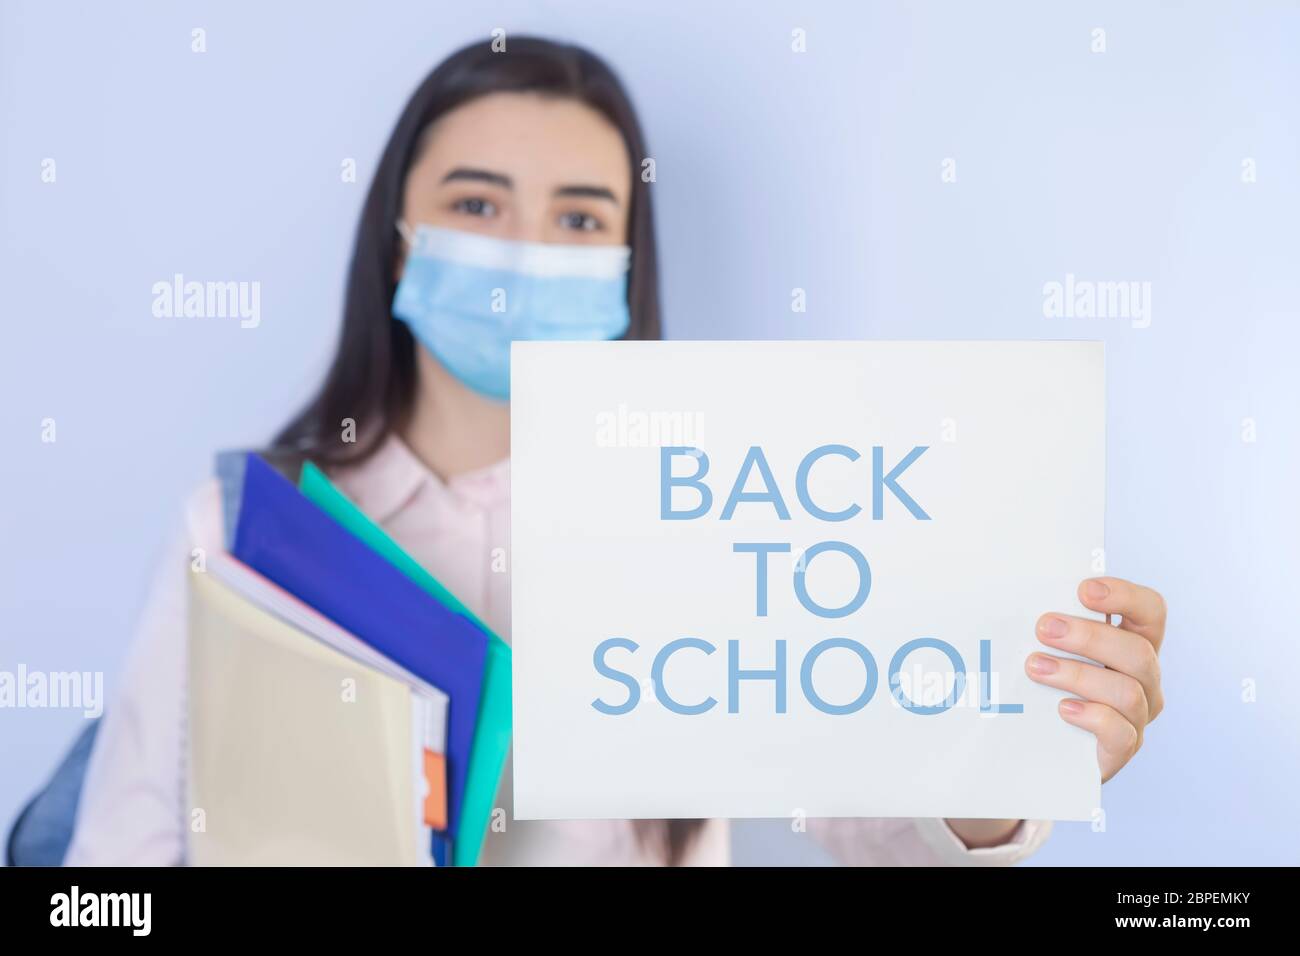 High school girl with mask on her showing back to school message. Student girl ready for school during the coronavirus pandemic. Focus on her hand wit Stock Photo